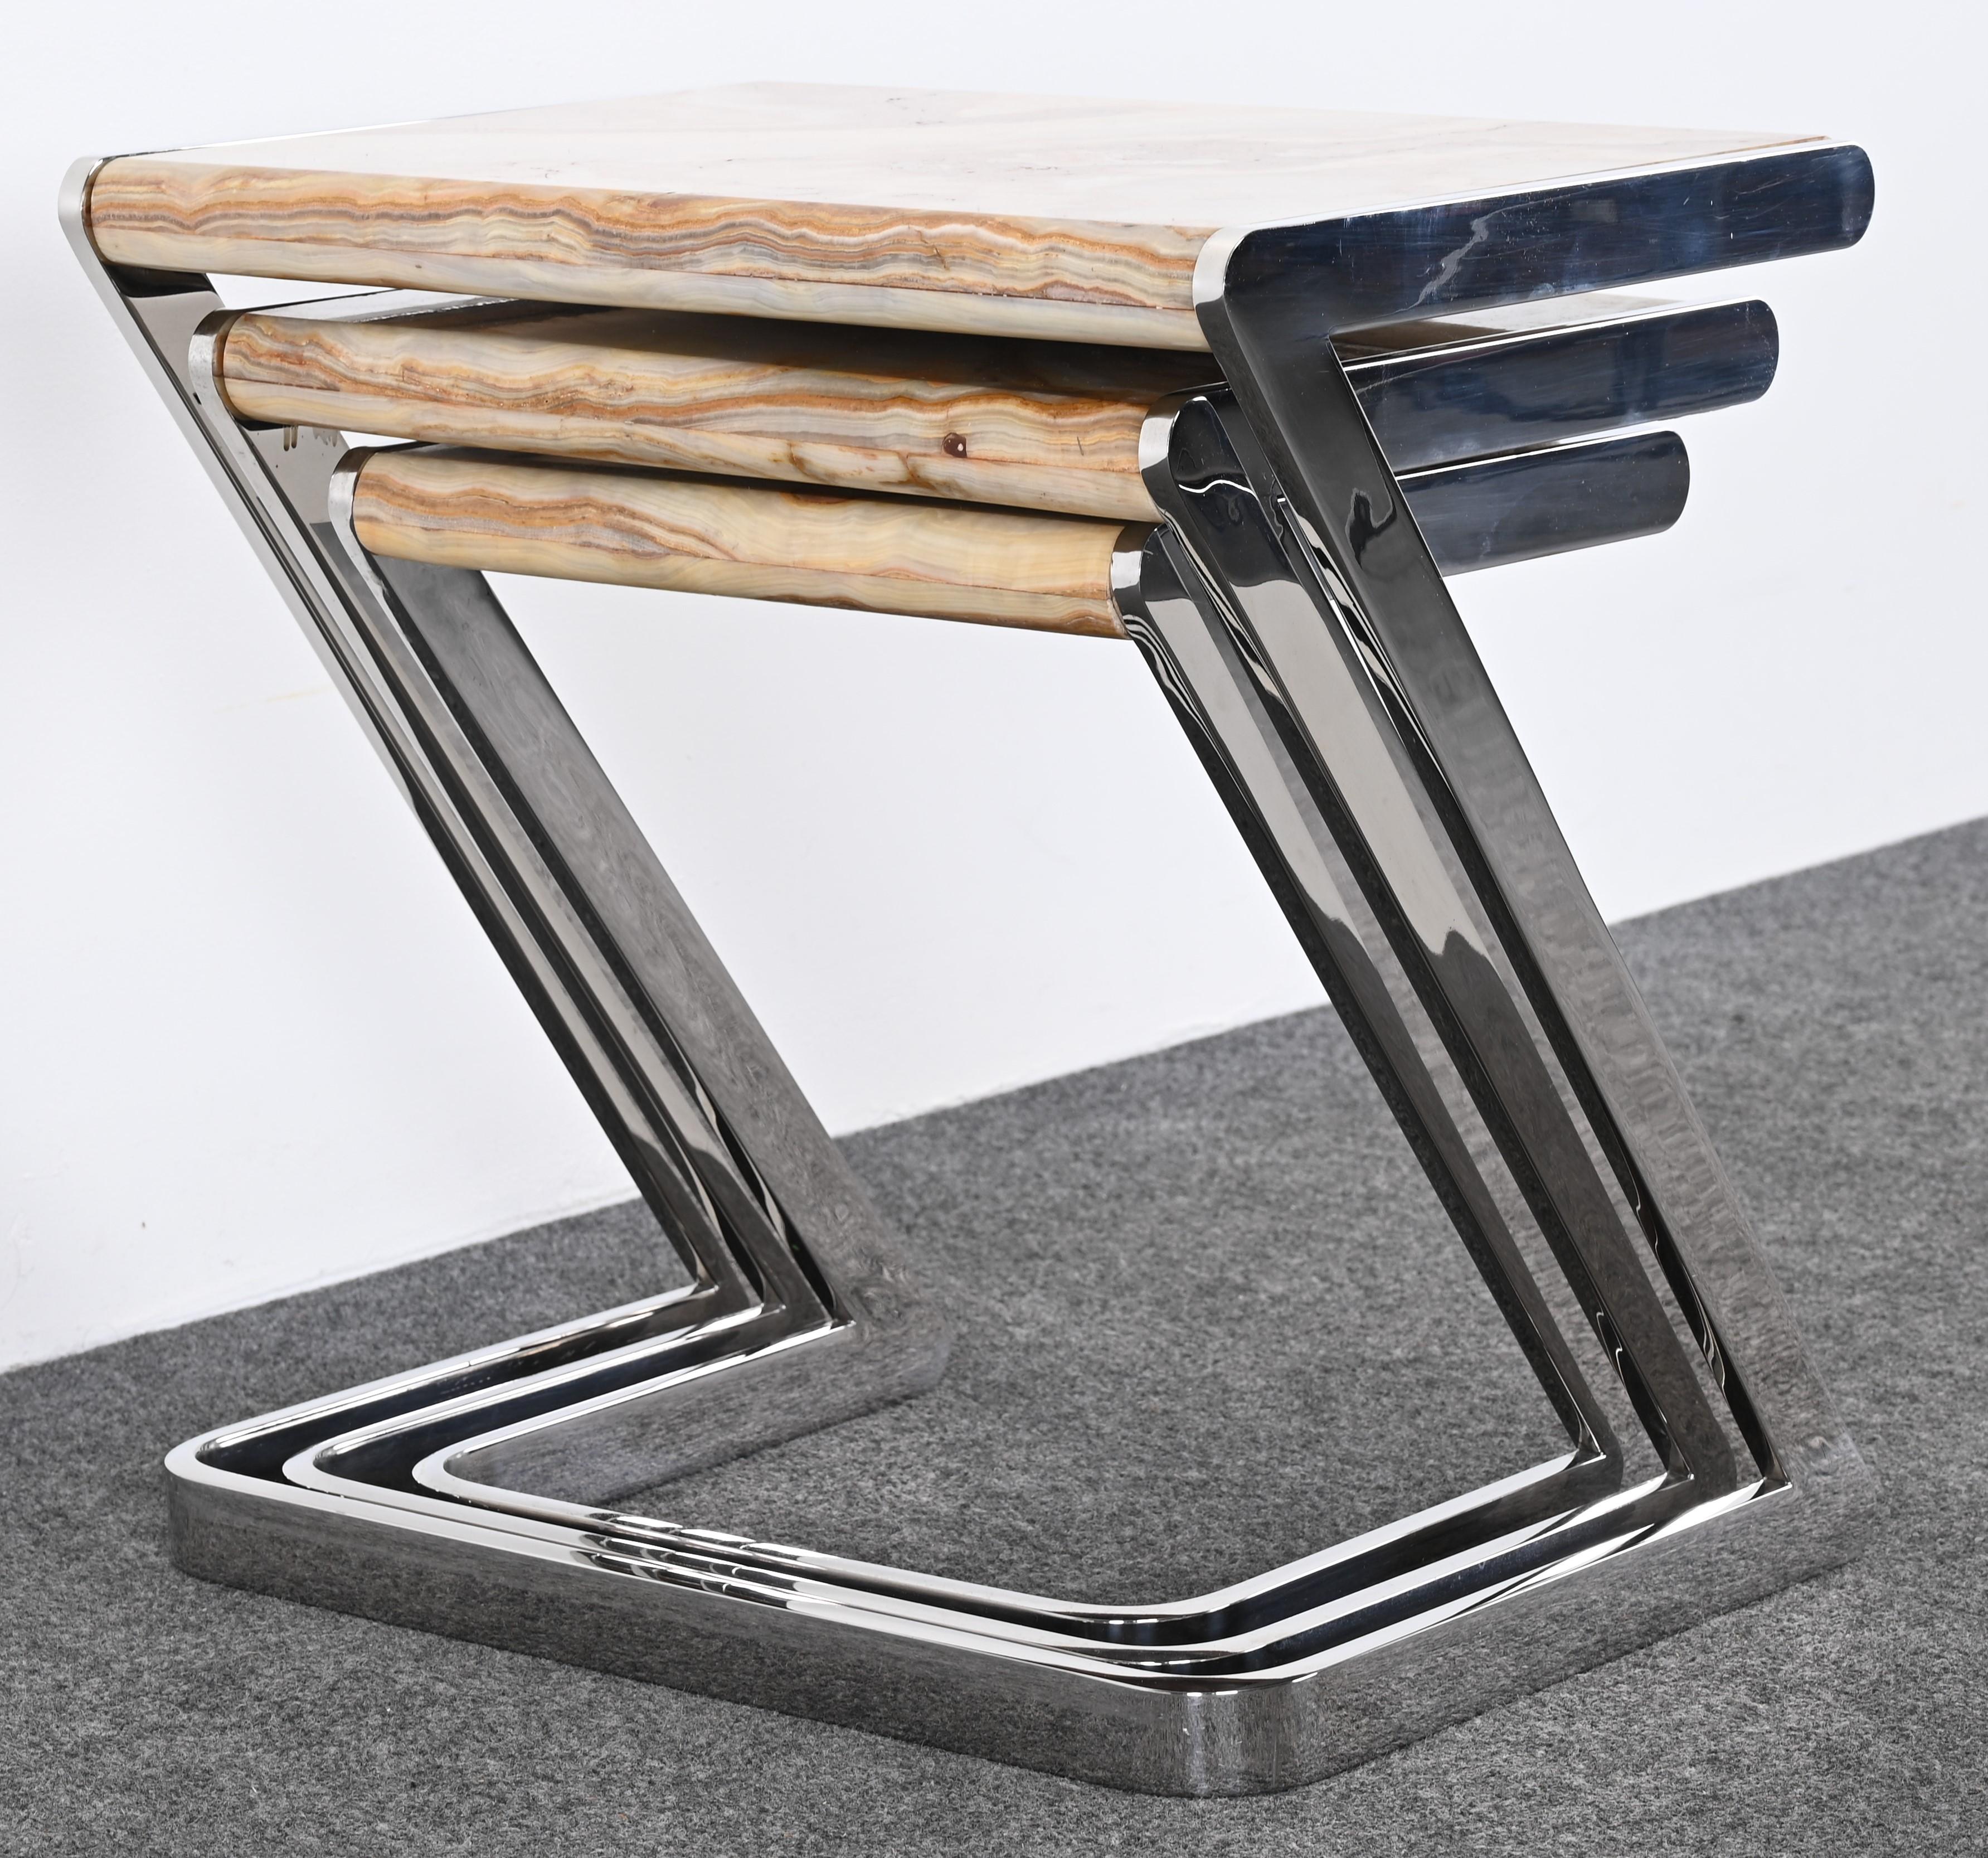 Onyx and Stainless Steel Nesting Tables by Brueton, 1980s For Sale 10